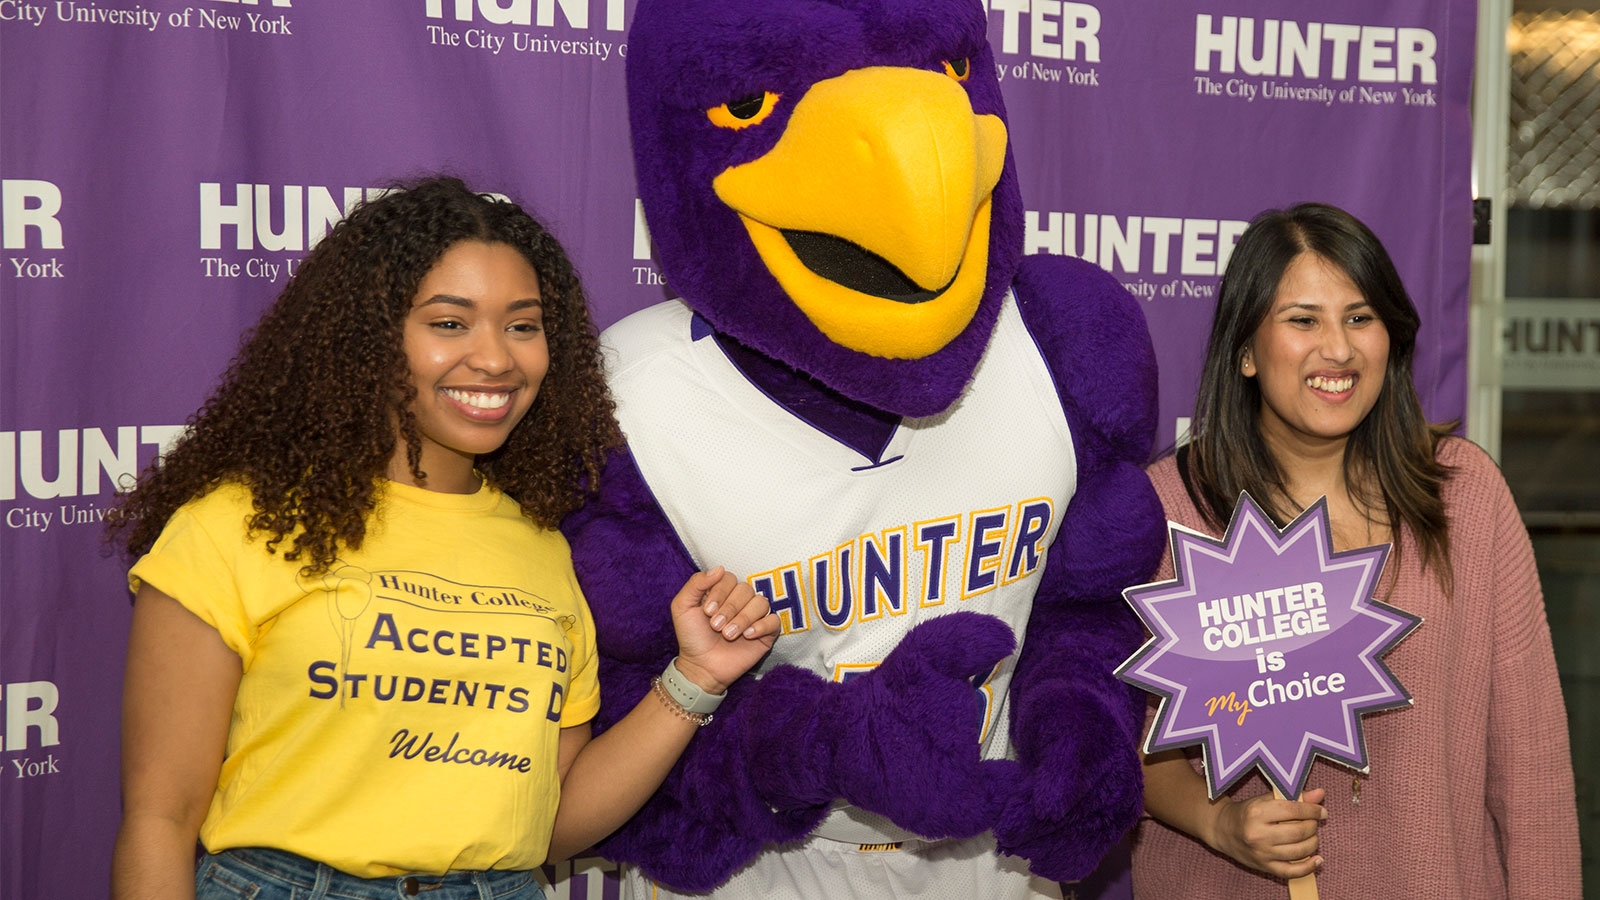 accepted students with hawk